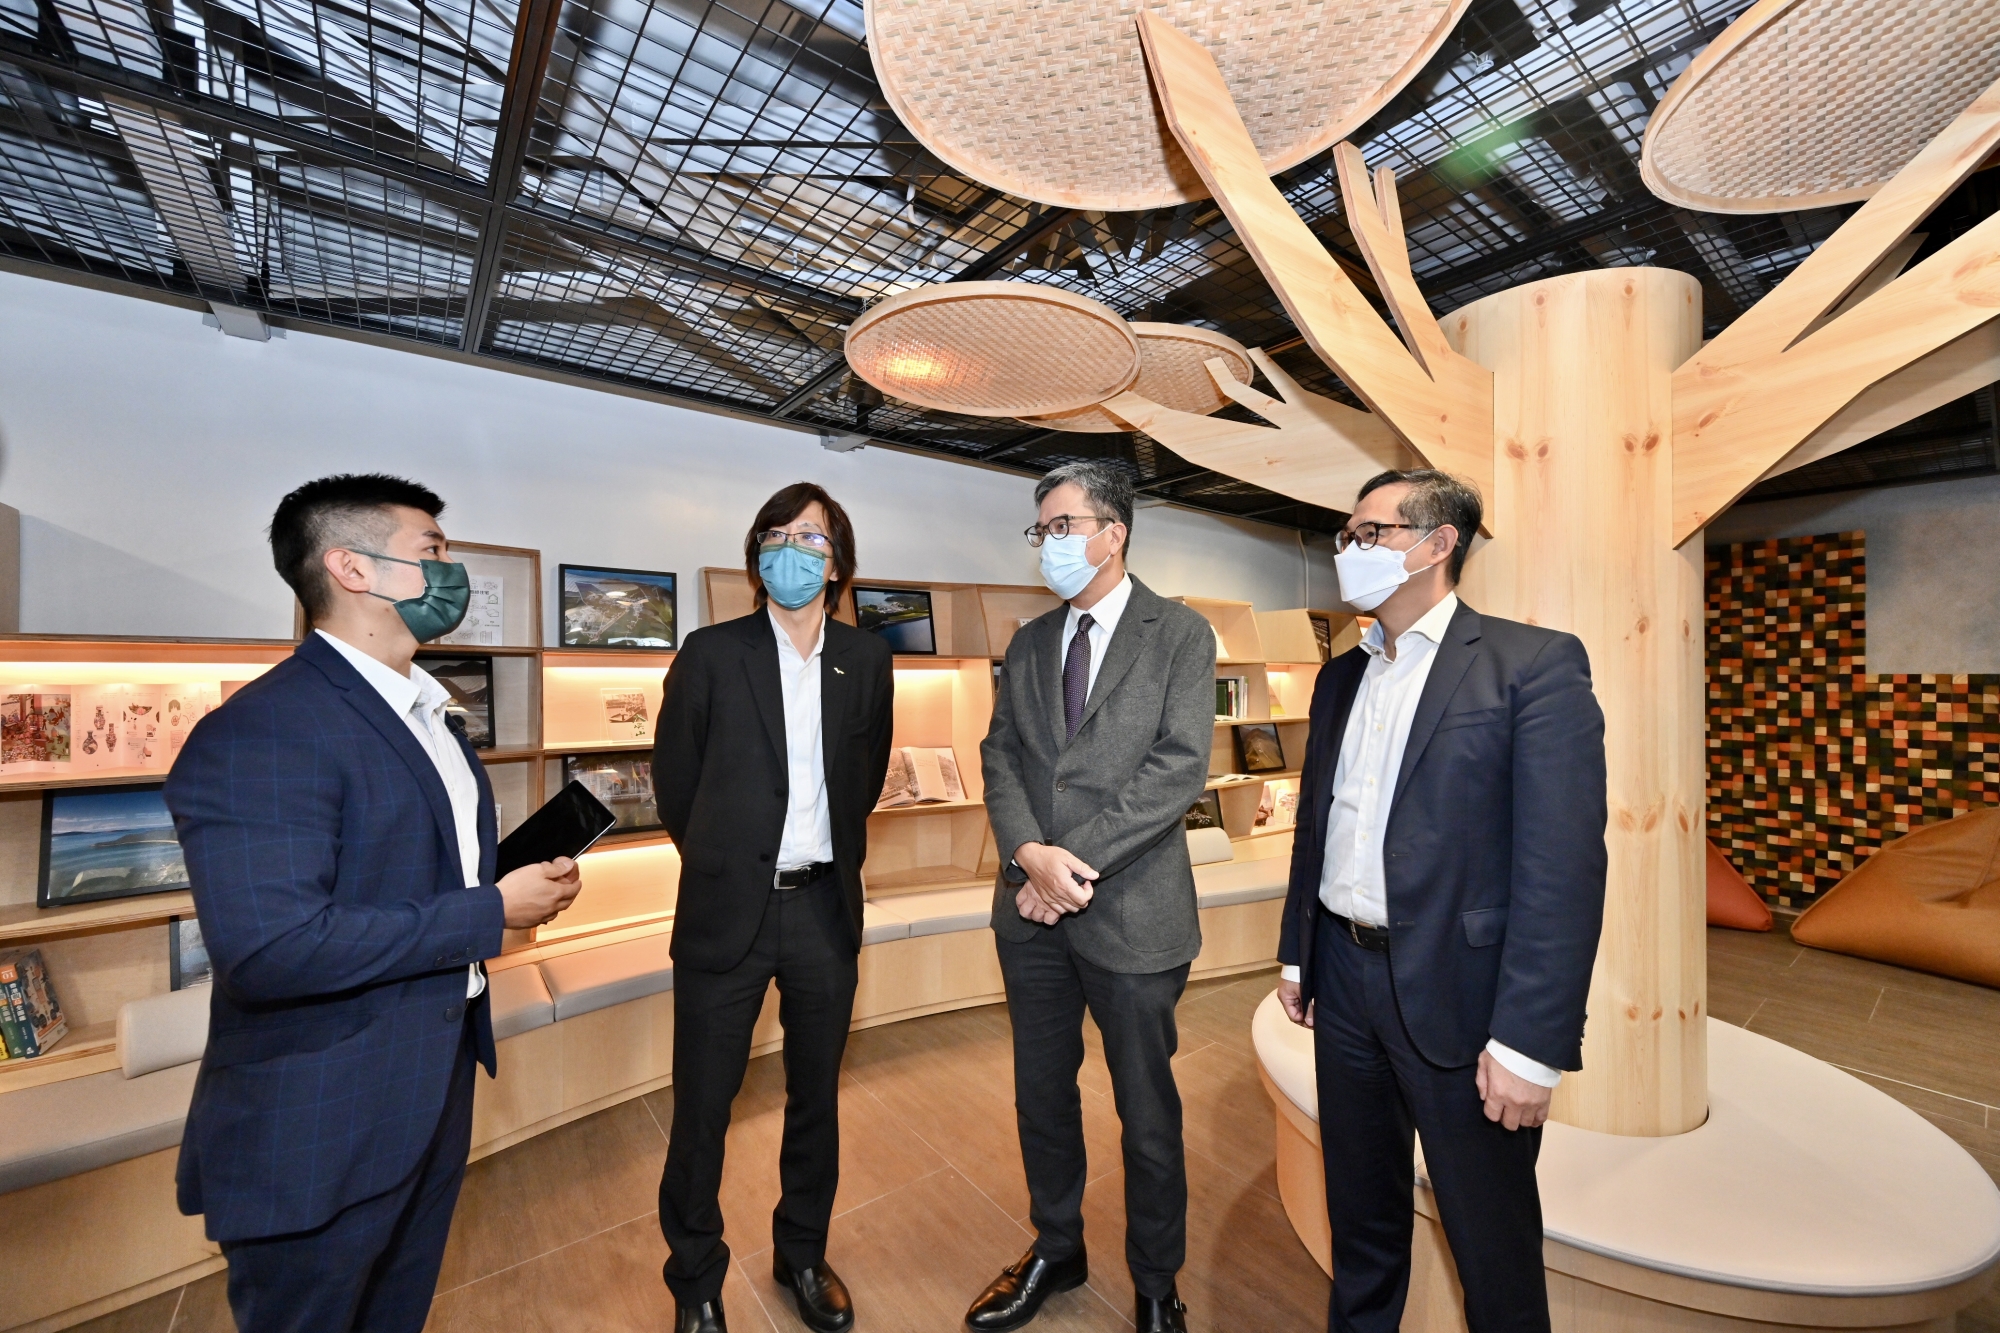 The SDEV, Mr Michael WONG (second right), and Permanent Secretary for Development (Works), Mr Ricky LAU (first right) visit the thematic exhibition zone in the centre, which currently holds an exhibition titled 